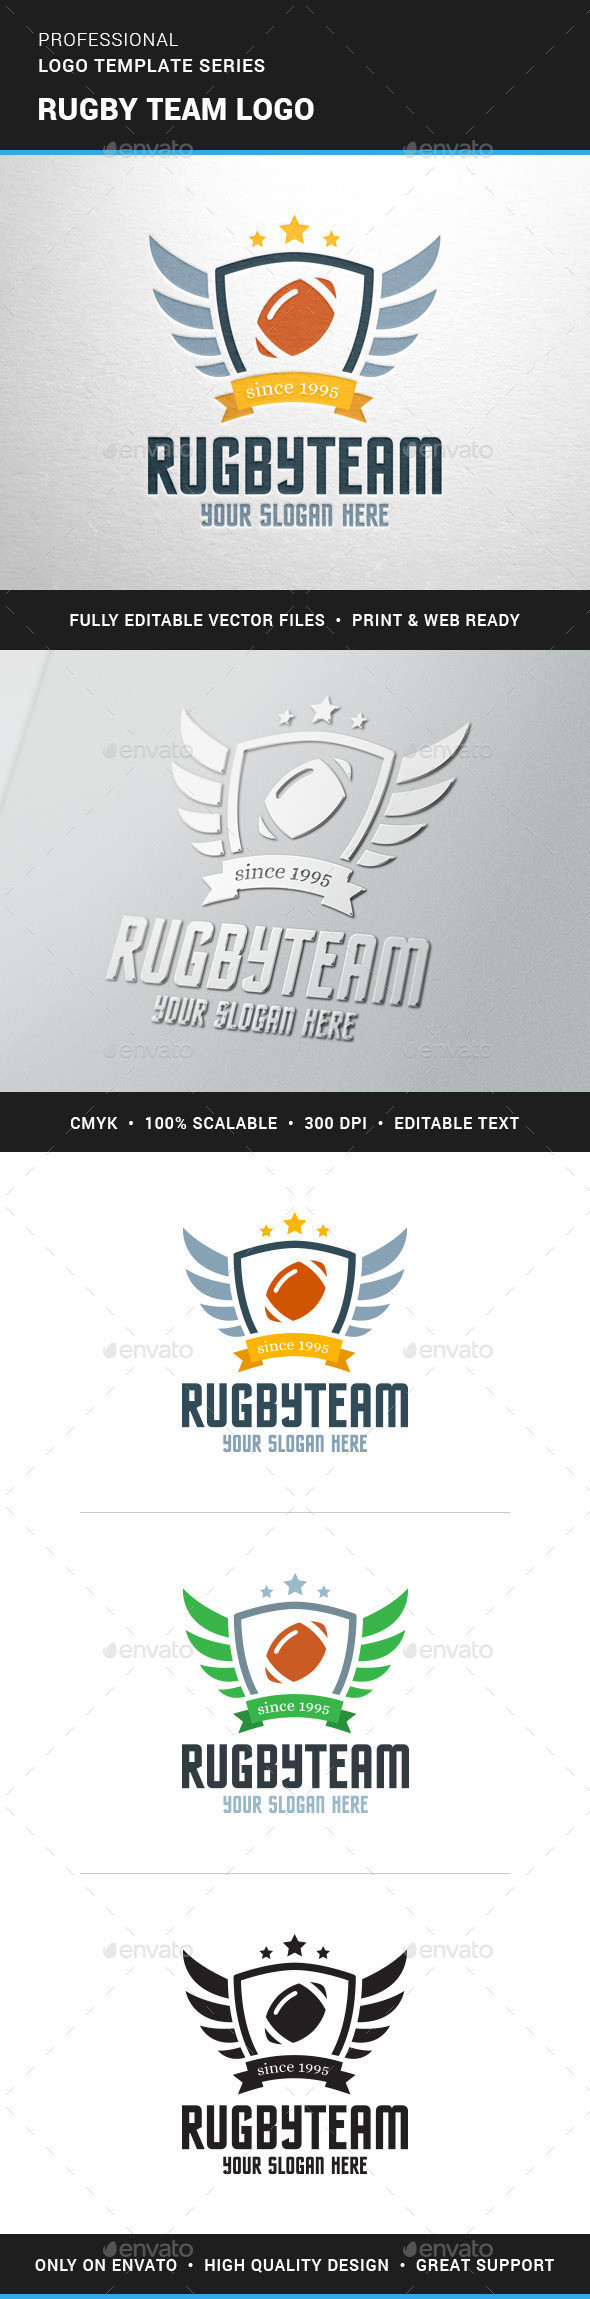 Rugby team logo template